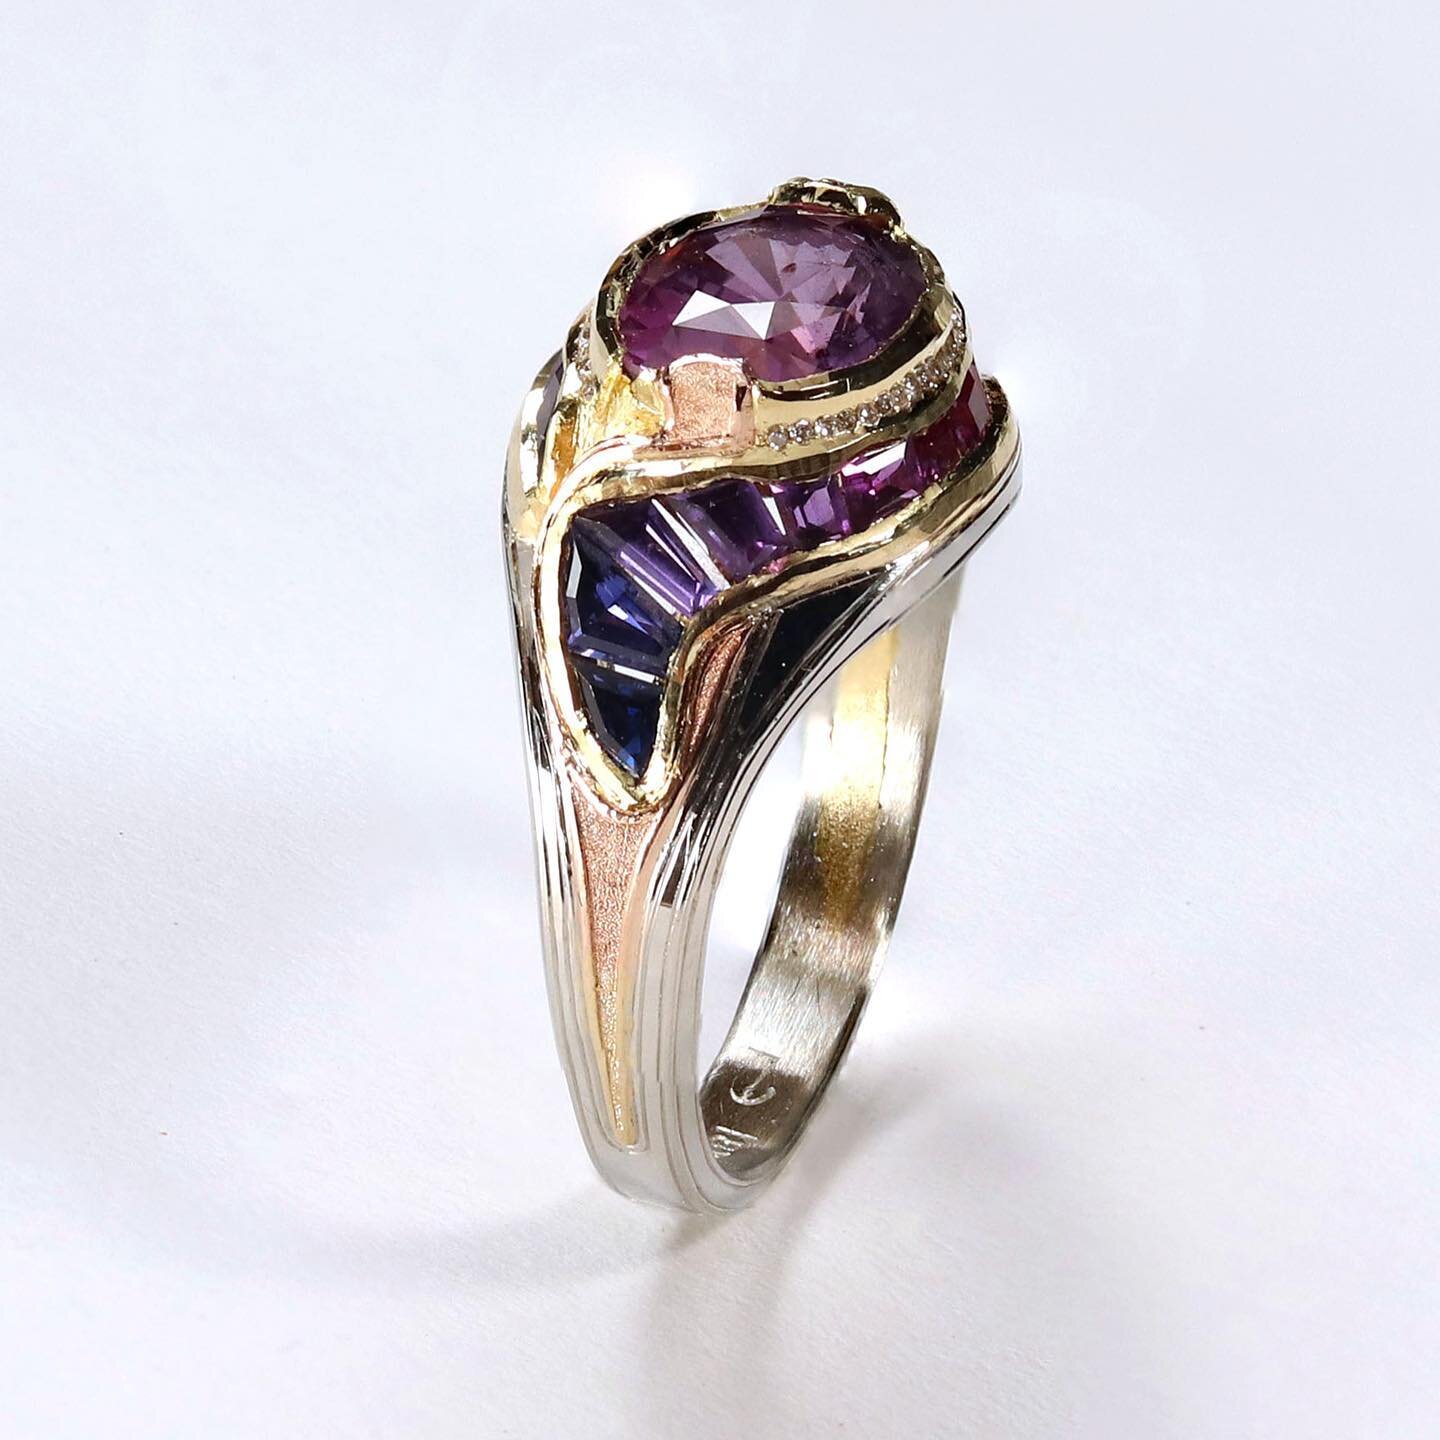 So happy to share this fantastic purple sapphire gradient engagement ring! Featuring a 3.23ct purple sapphire, 1.2ct of custom cut sapphire along with .07ct .5mm diamonds&hellip;
This ring was cast in 18k yellow gold then overcast with 18k white gold